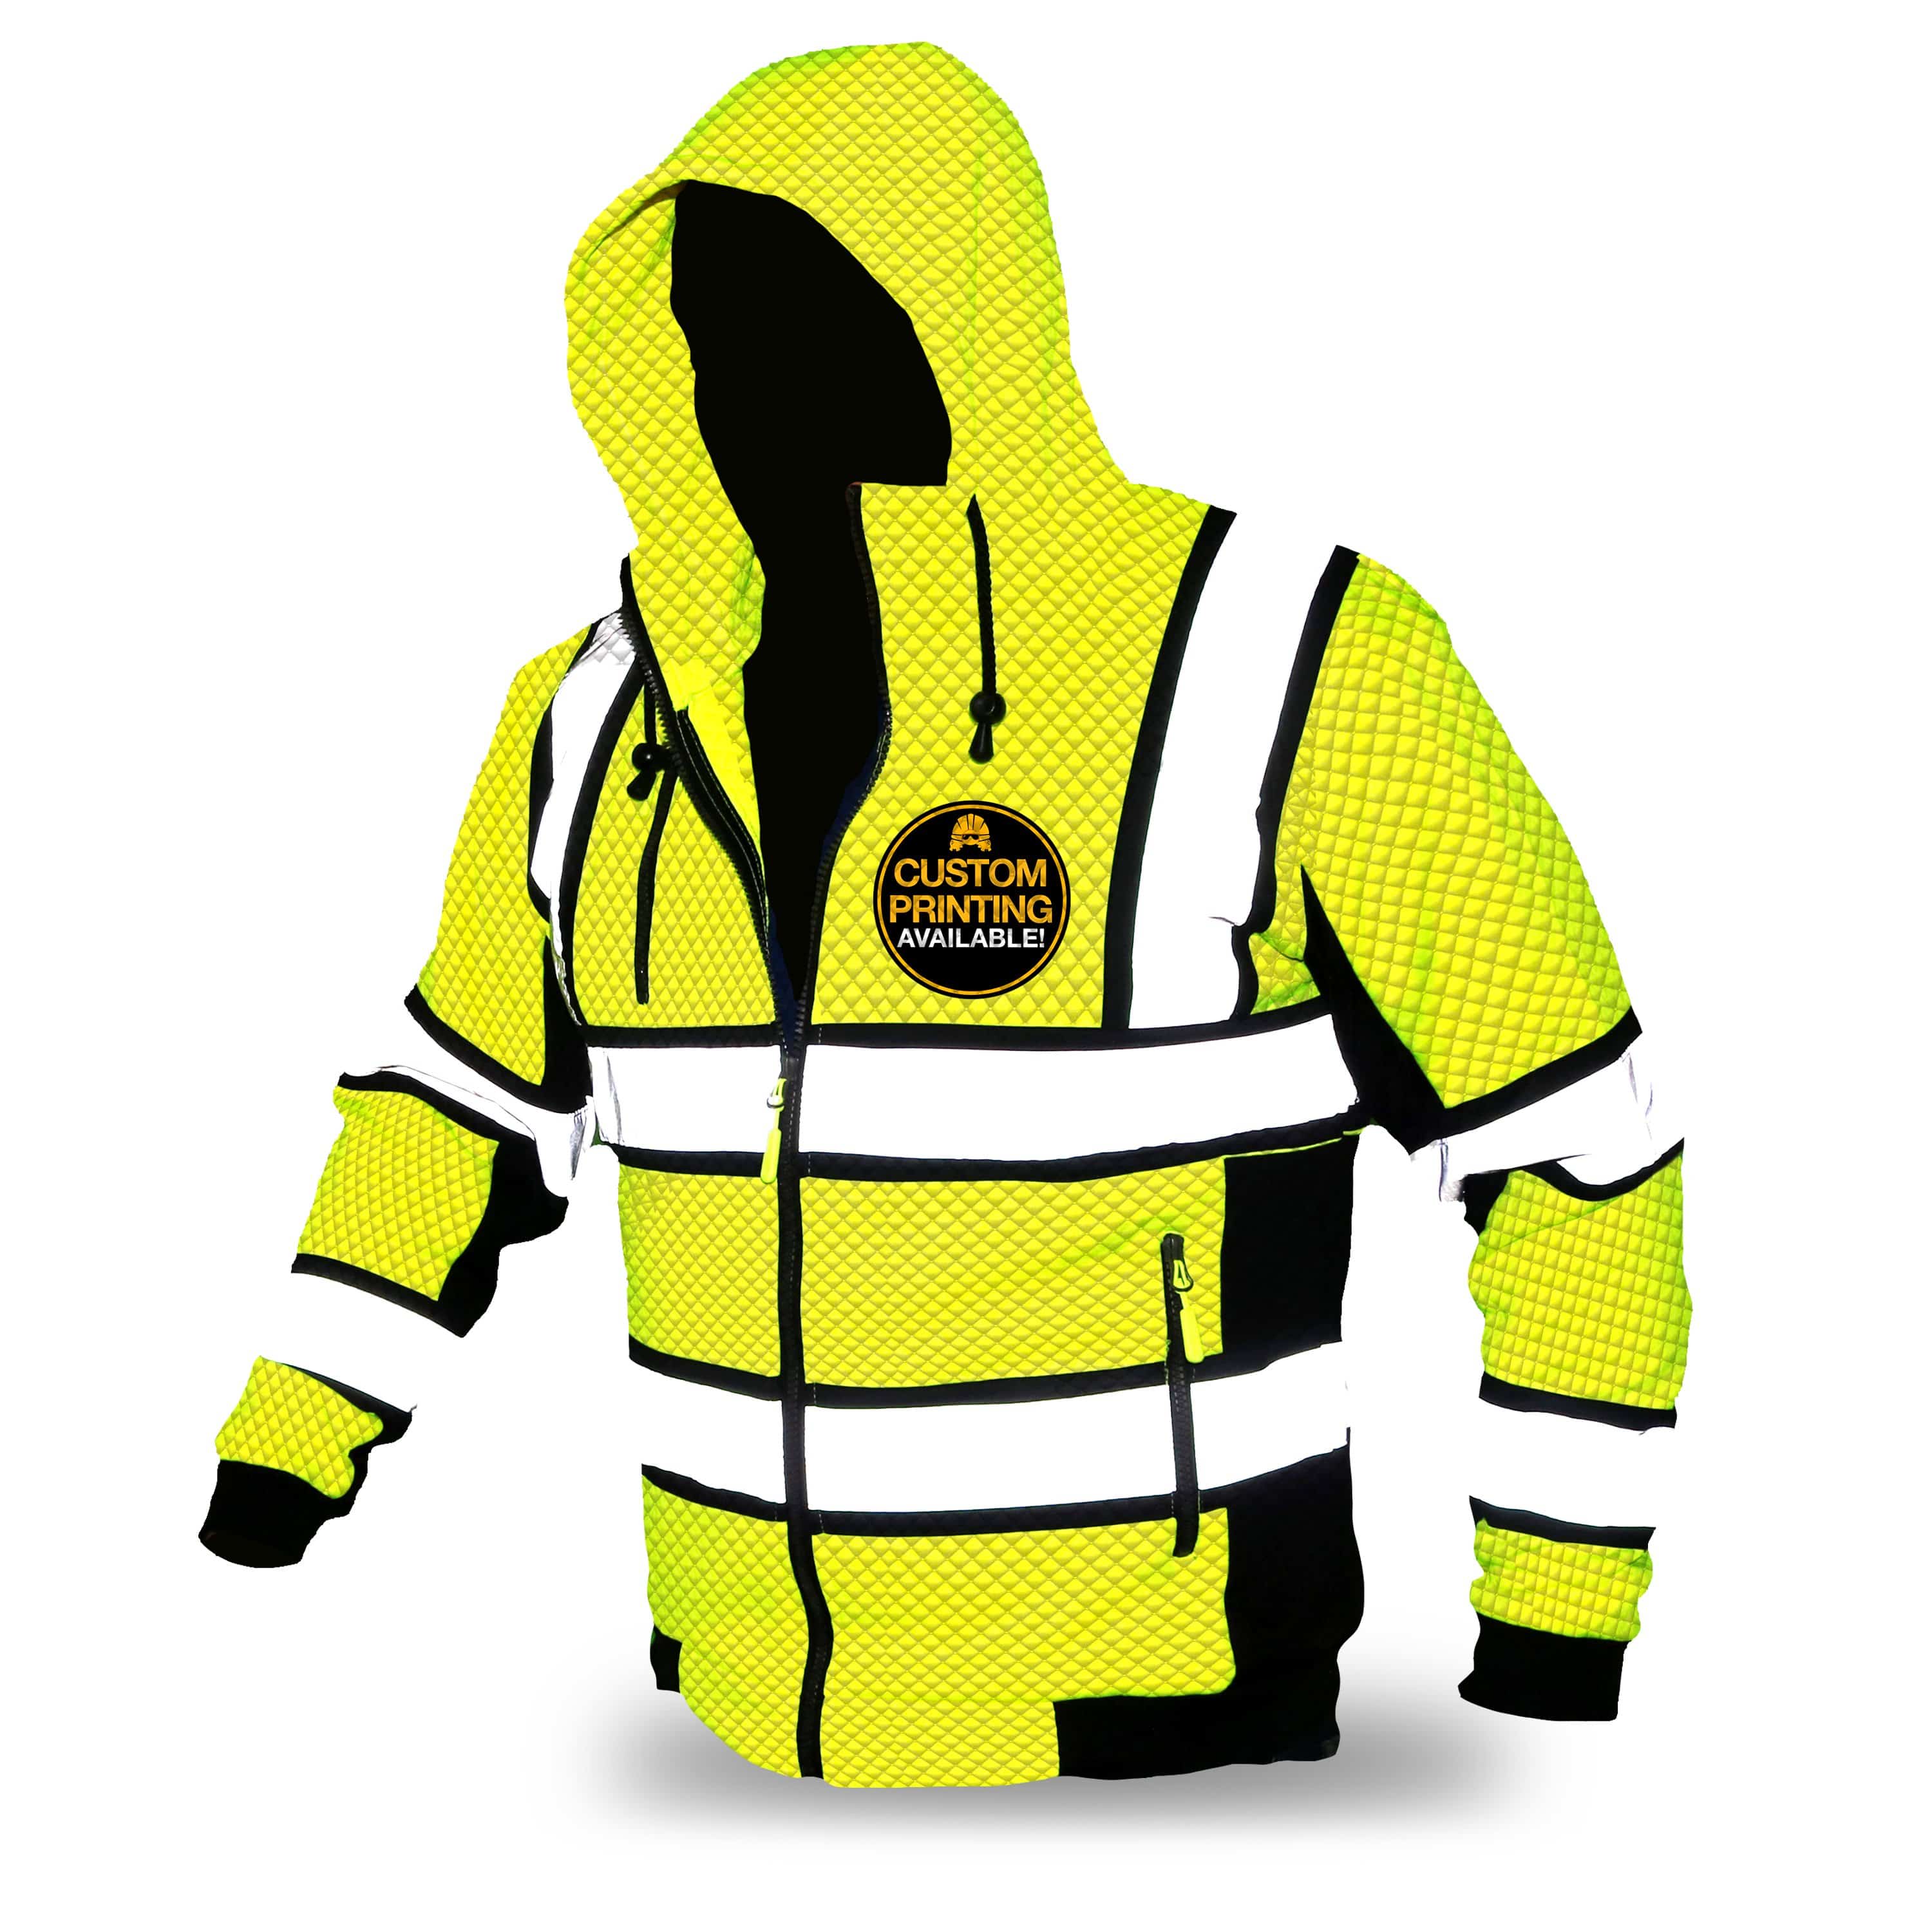 KwikSafety SAGE Safety Jacket (PREMIUM QUILTED STITCHING) Class 3 ANSI  Tested OSHA Compliant Hi Vis Hoodie Reflective PPE - Model No.: KS5505